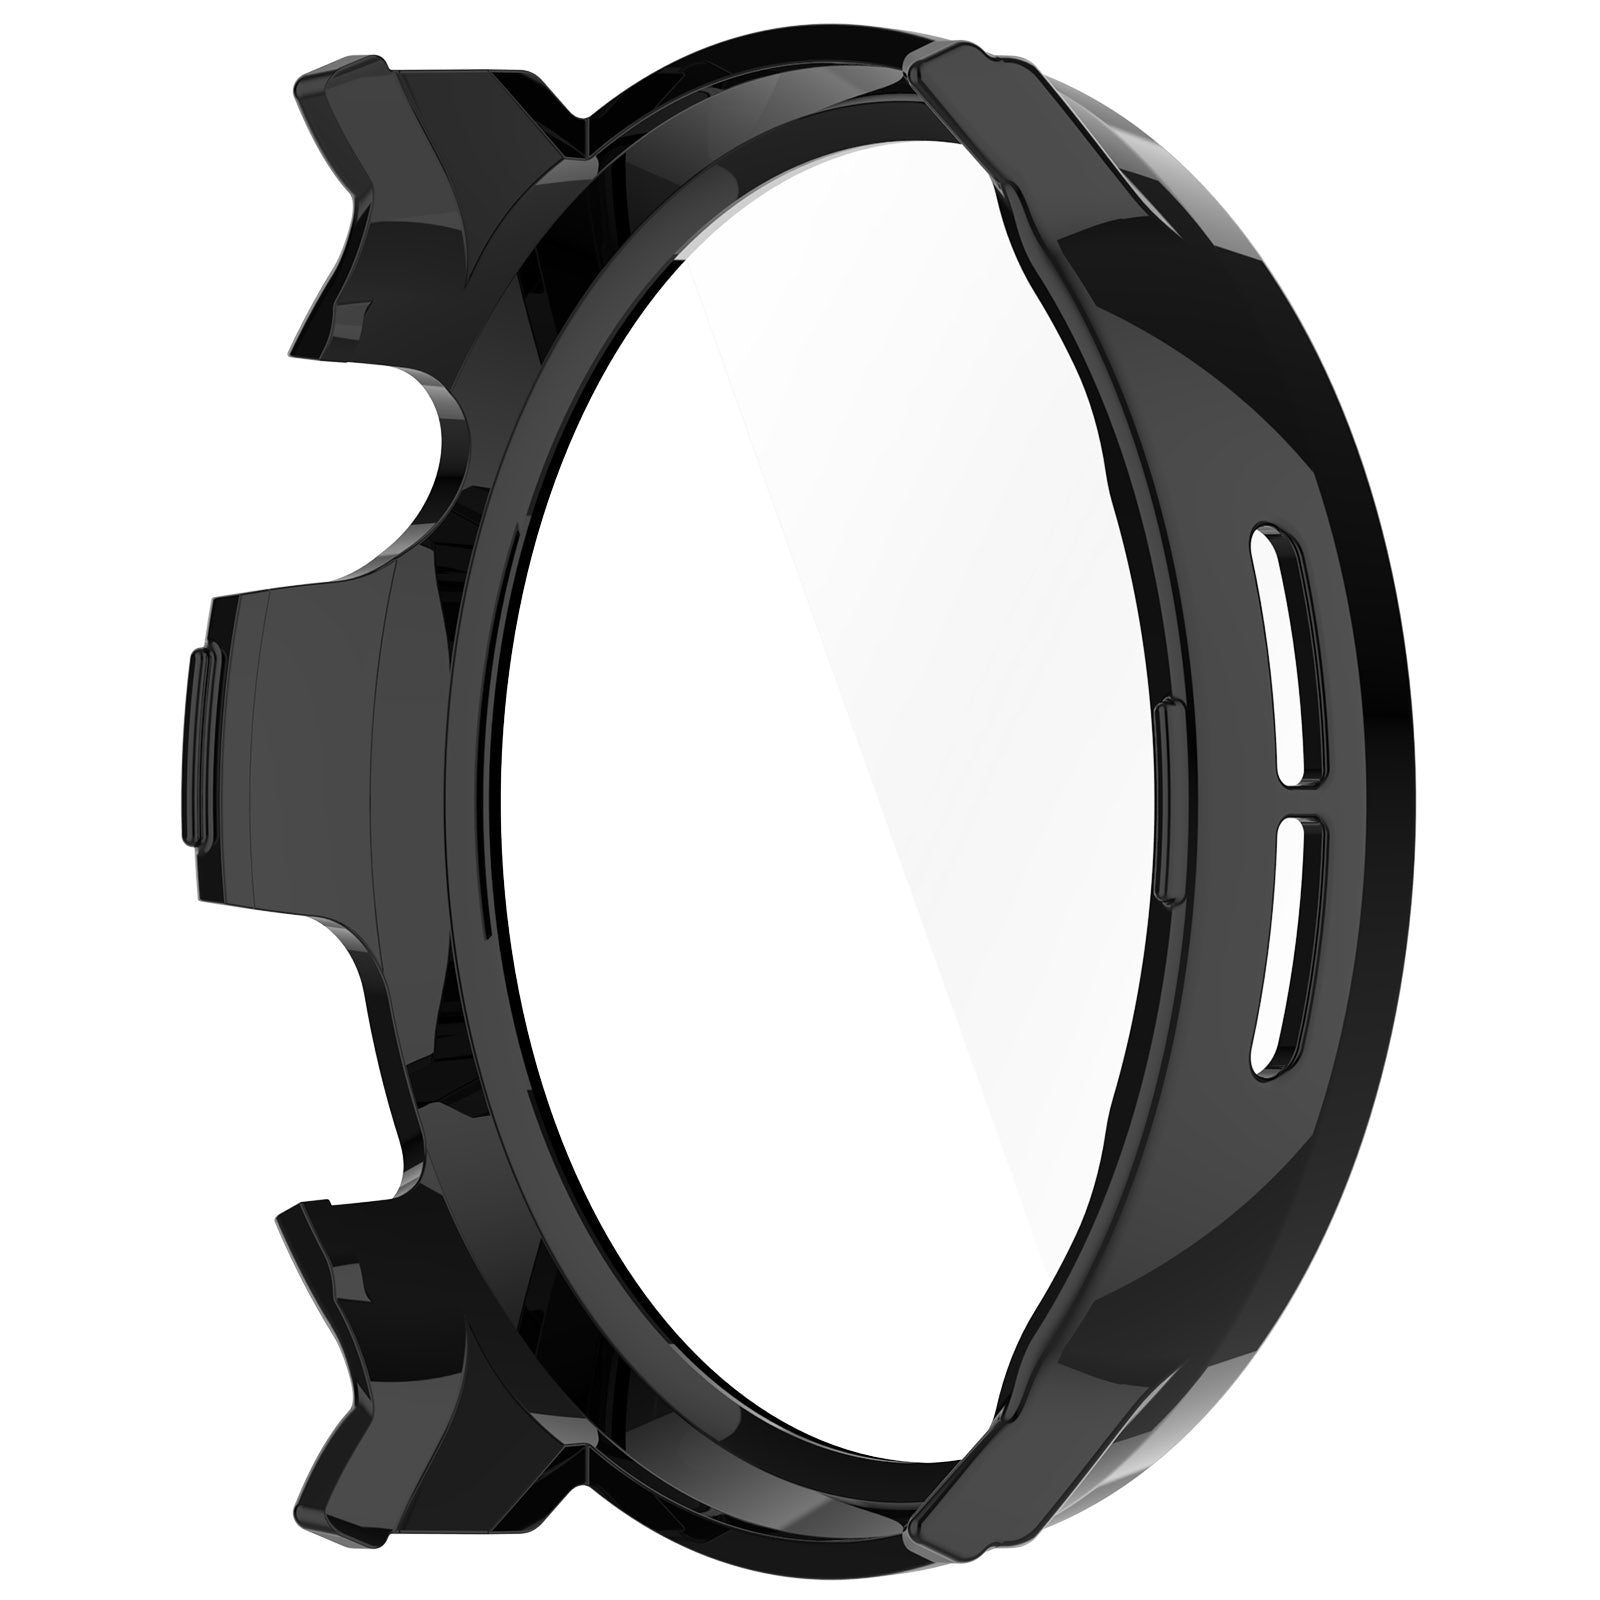 Hard PC Case for Mibro Watch Lite2 Watch Cover with Tempered Glass Screen Film - Black